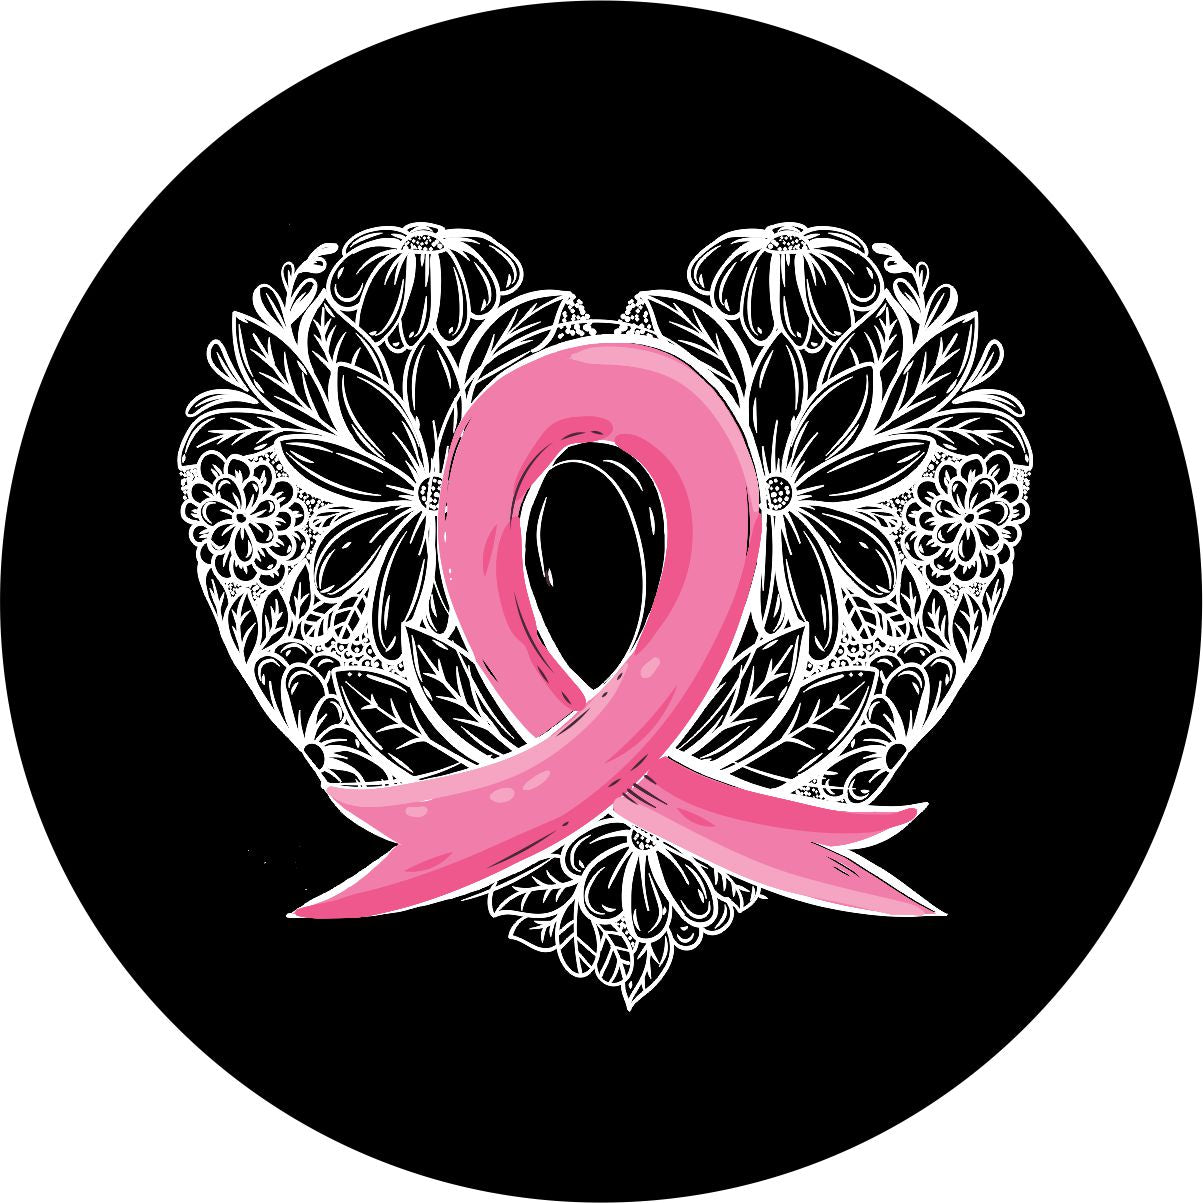 Spare tire cover design on black vinyl of a pink breast cancer ribbon inside a beautiful hand drawn heart of florals